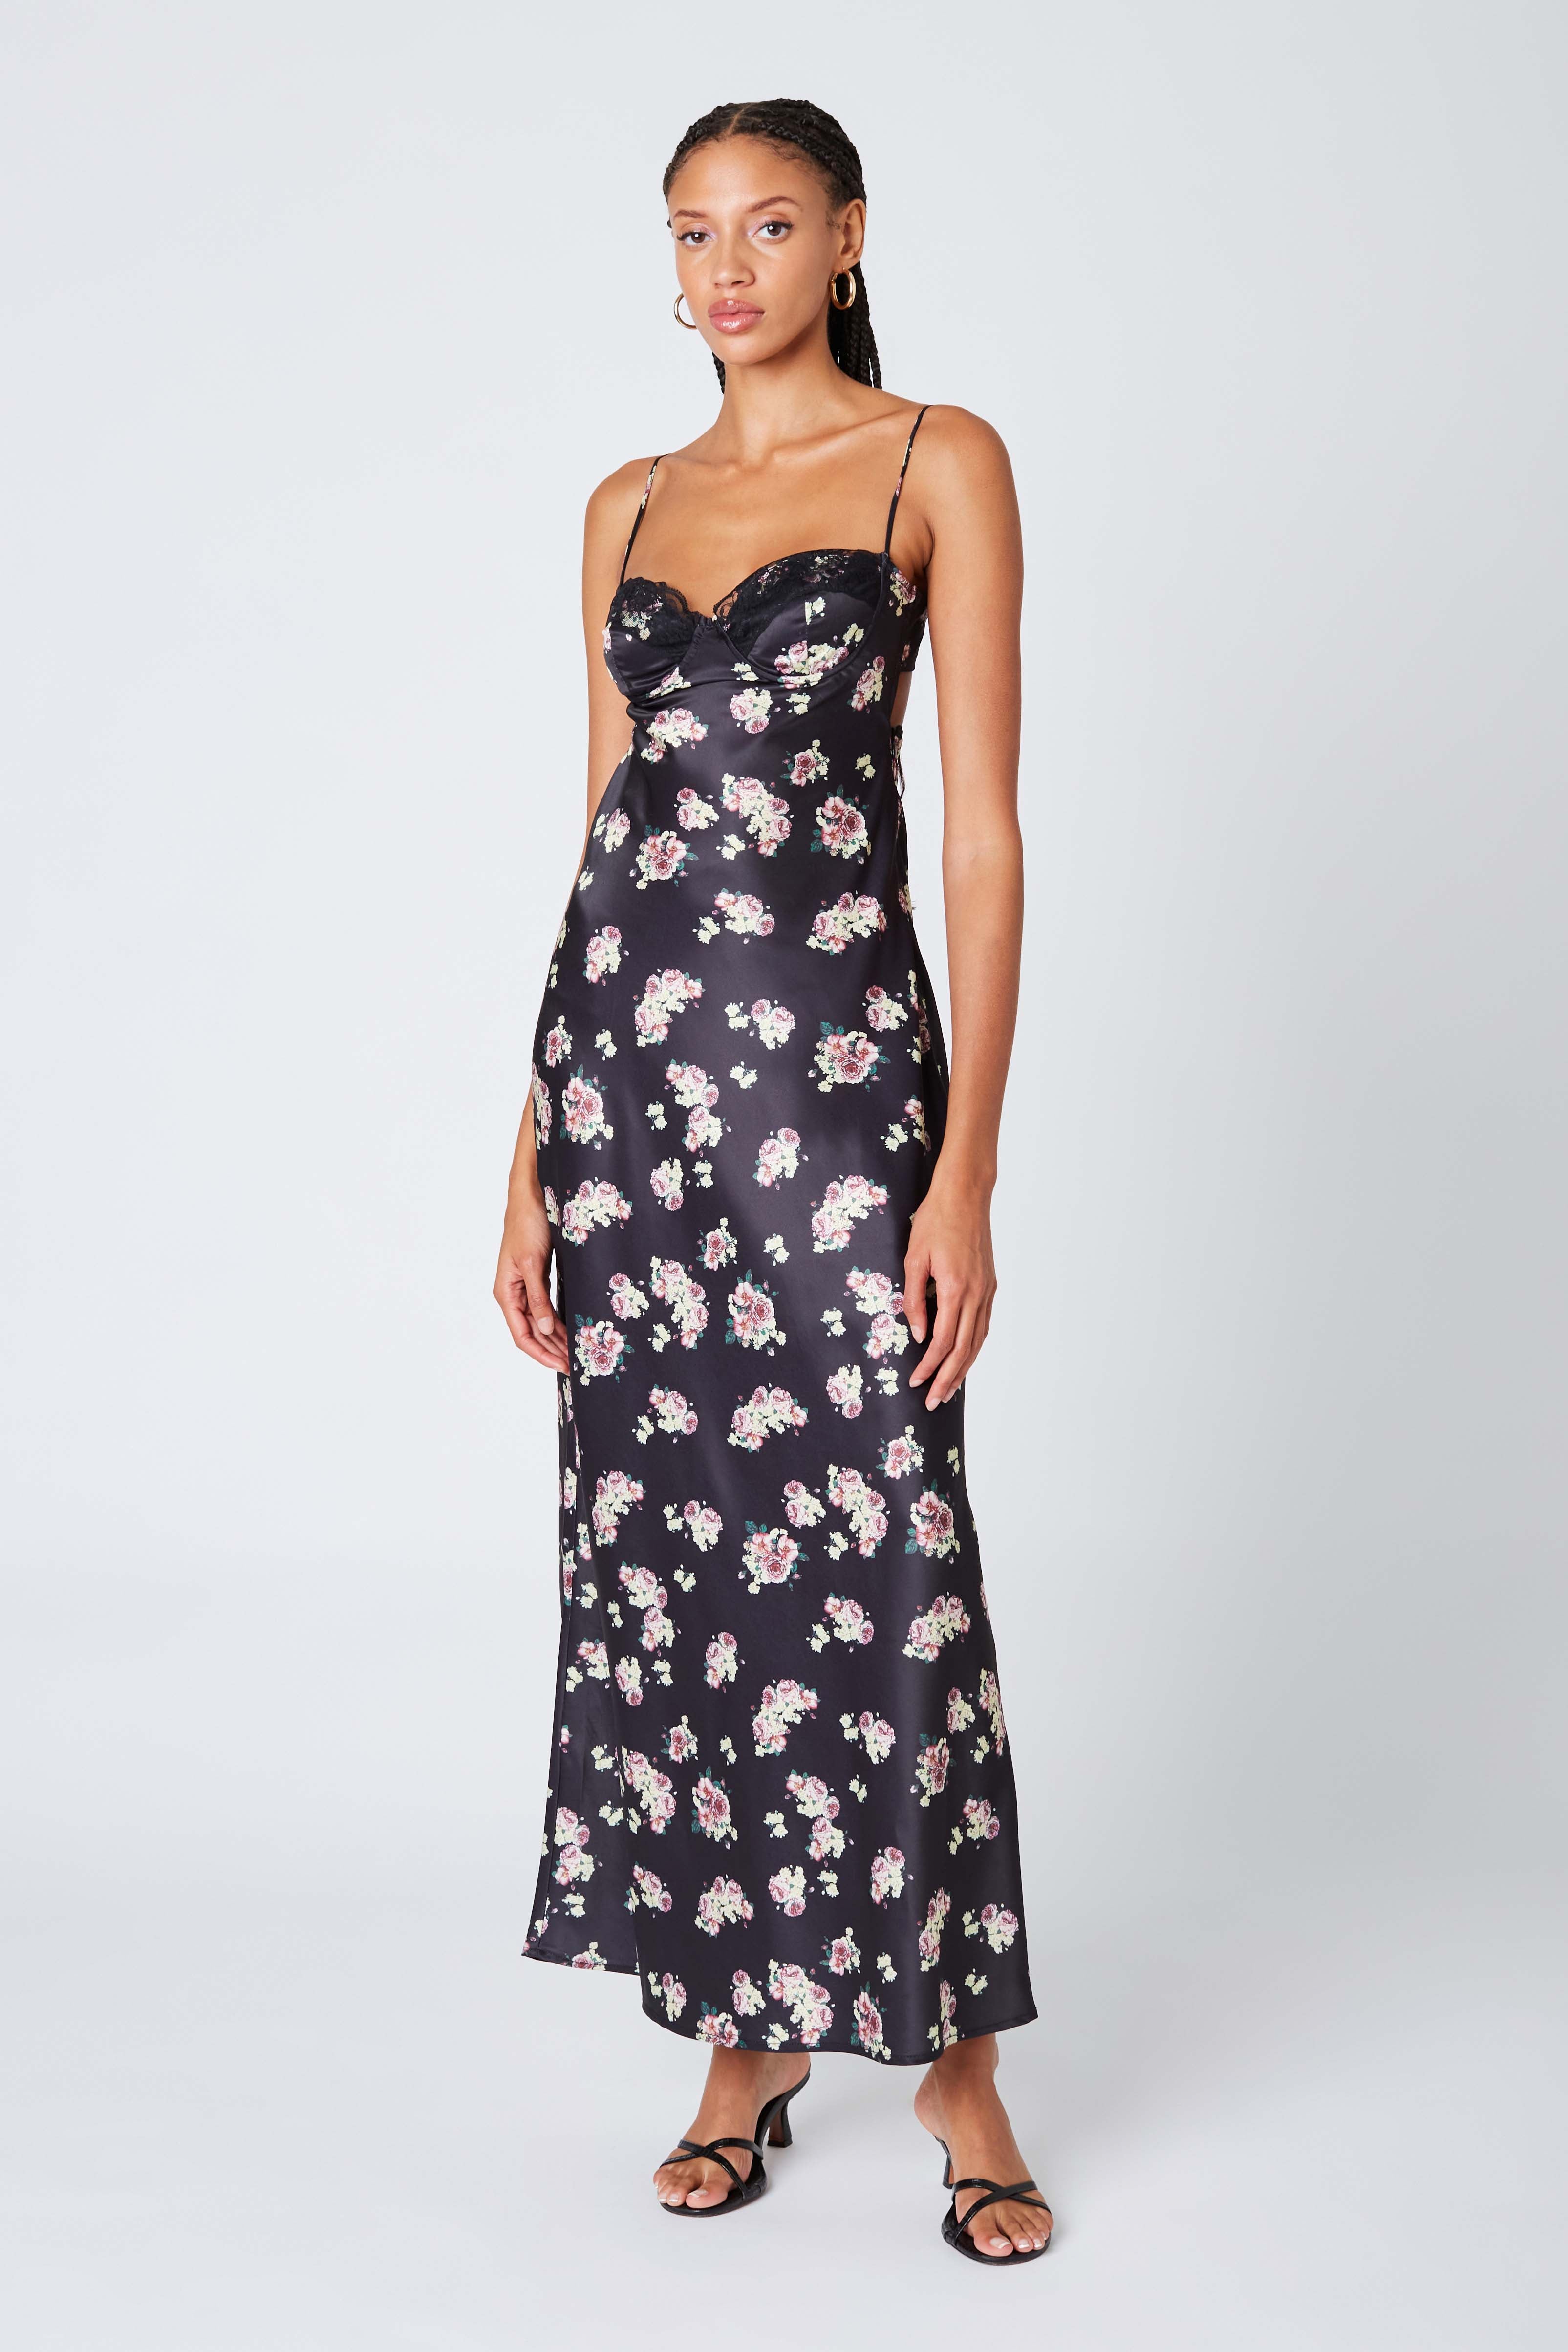 Corset Floral Maxi Dress in Black Front View 